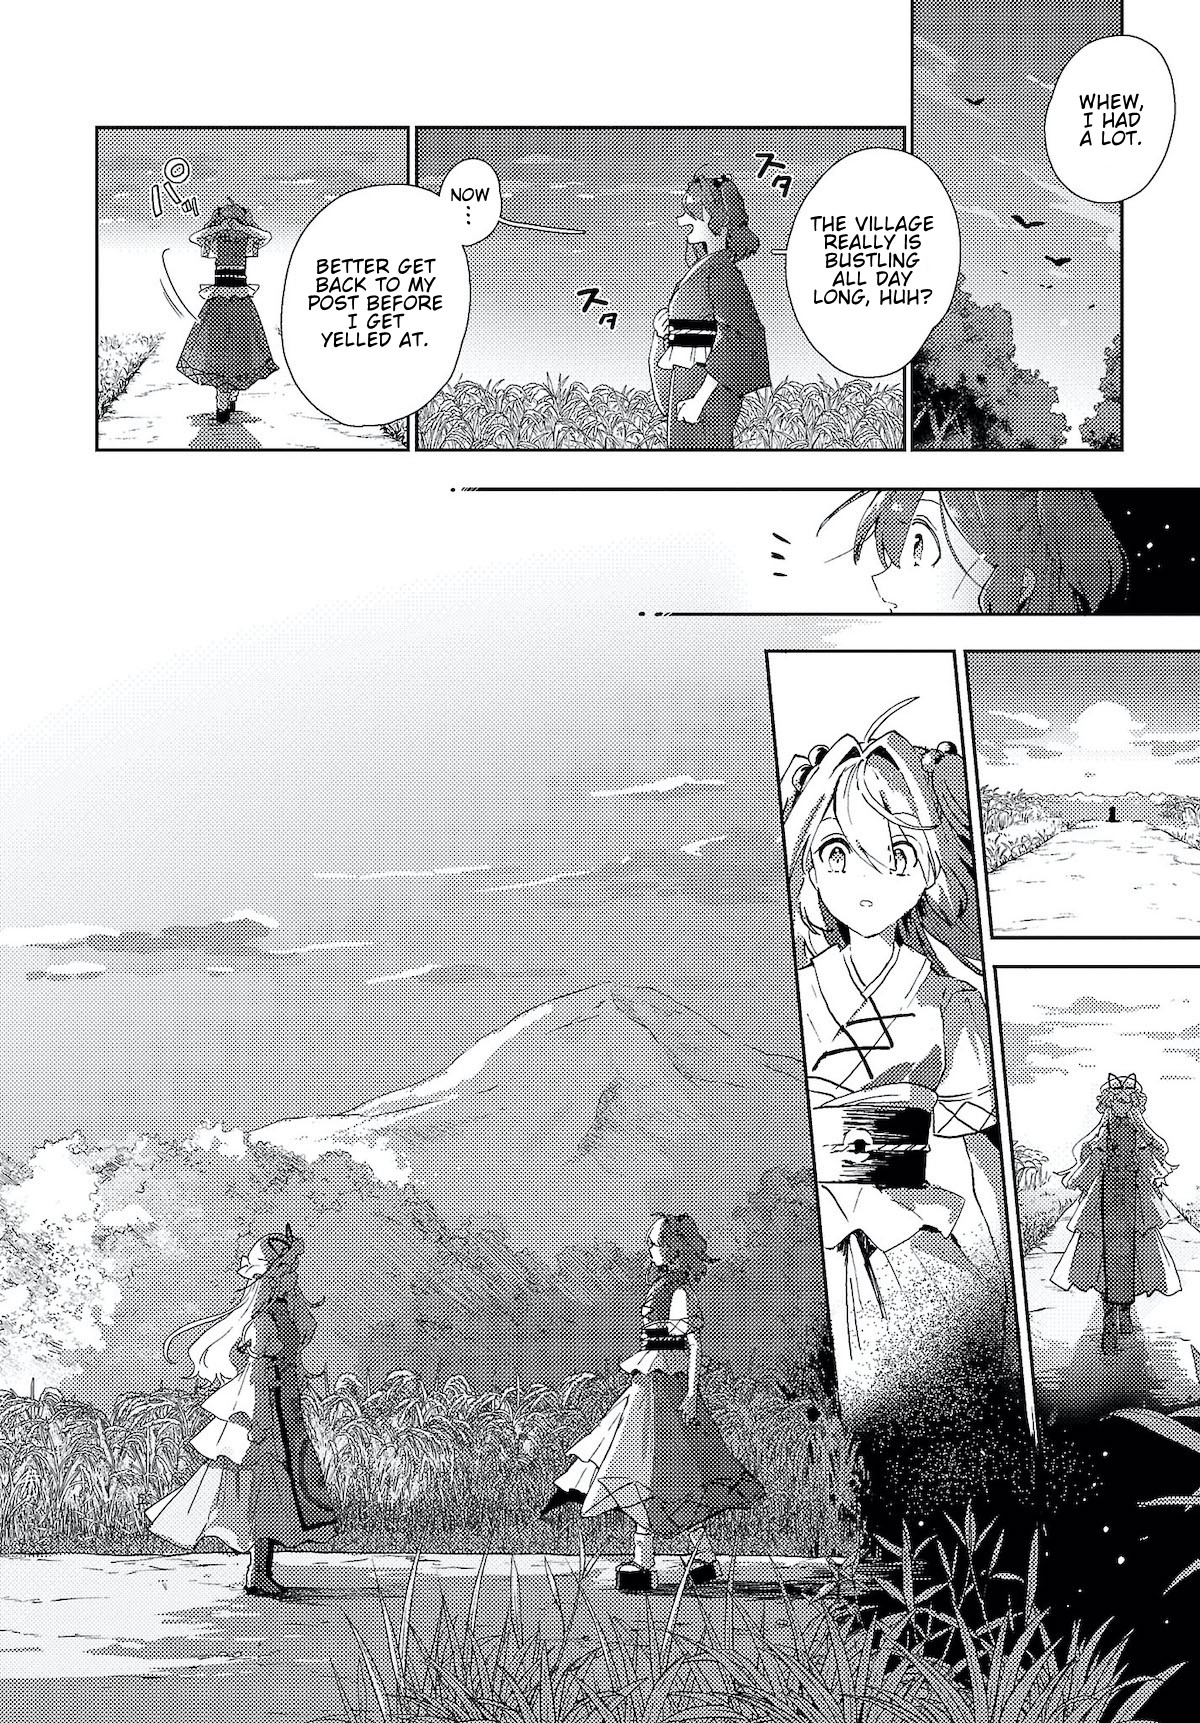 The Shinigami's Rowing Her Boat As Usual - Touhou - Page 2